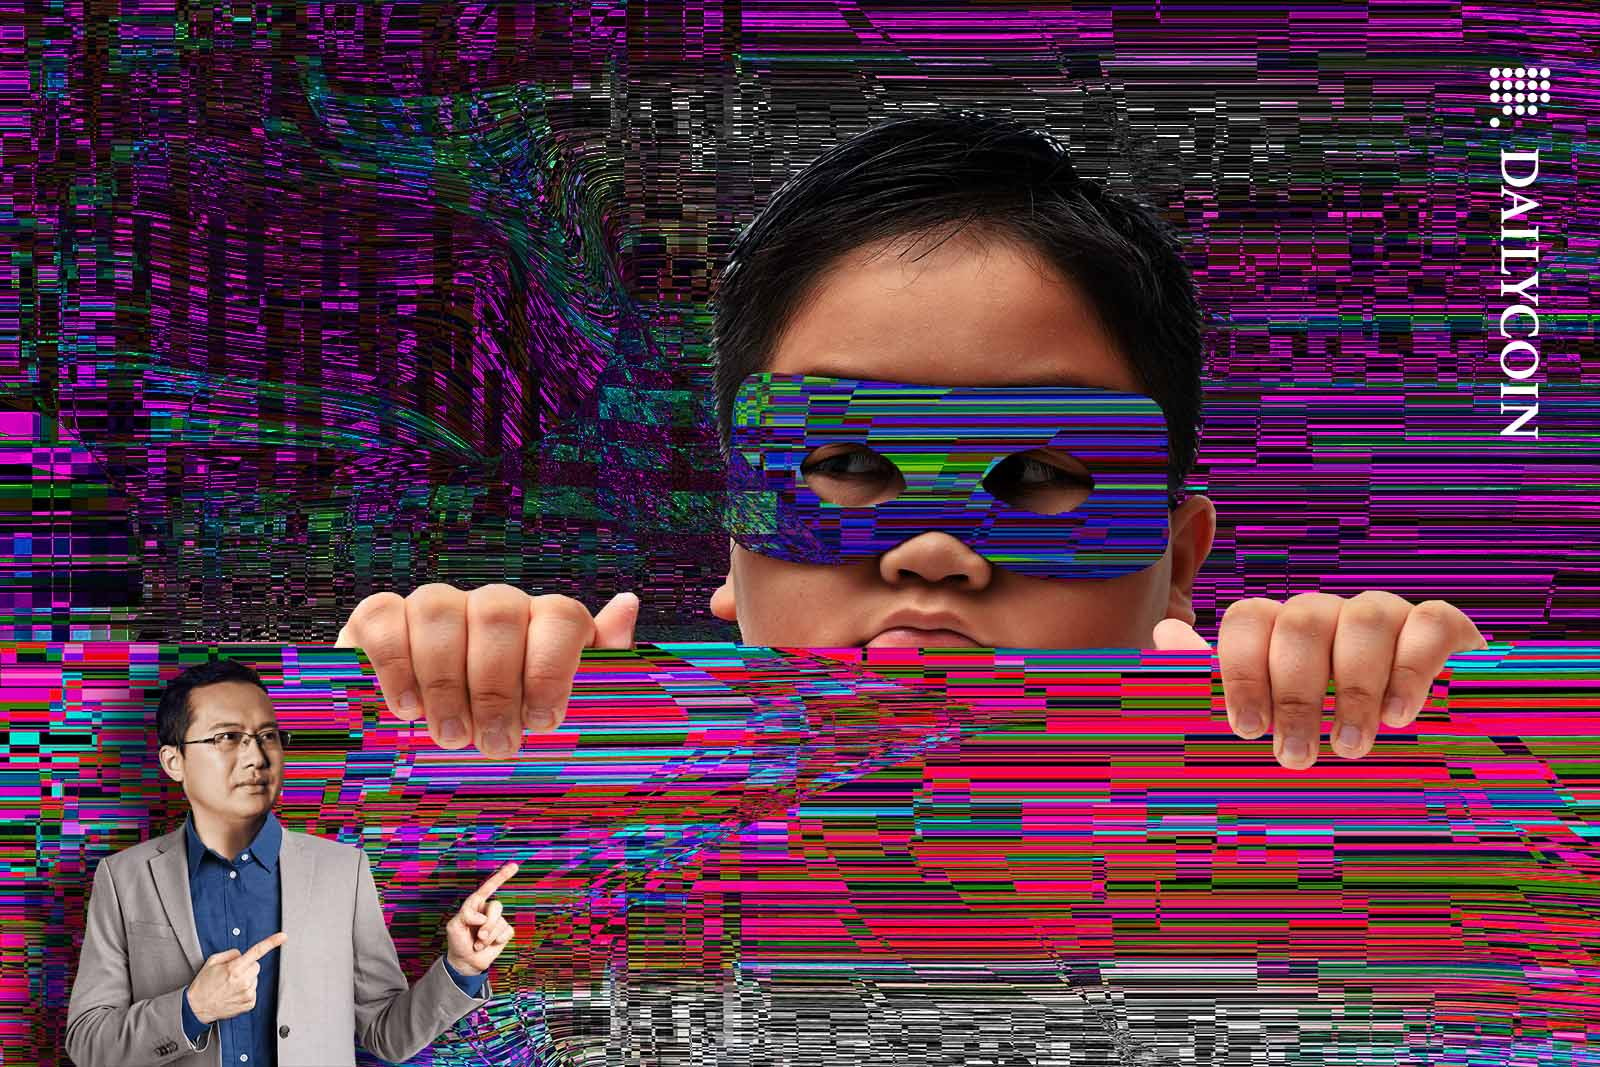 Star Xu pointing at a huge boy peaking out from behind digital noise wearing a noise mask.